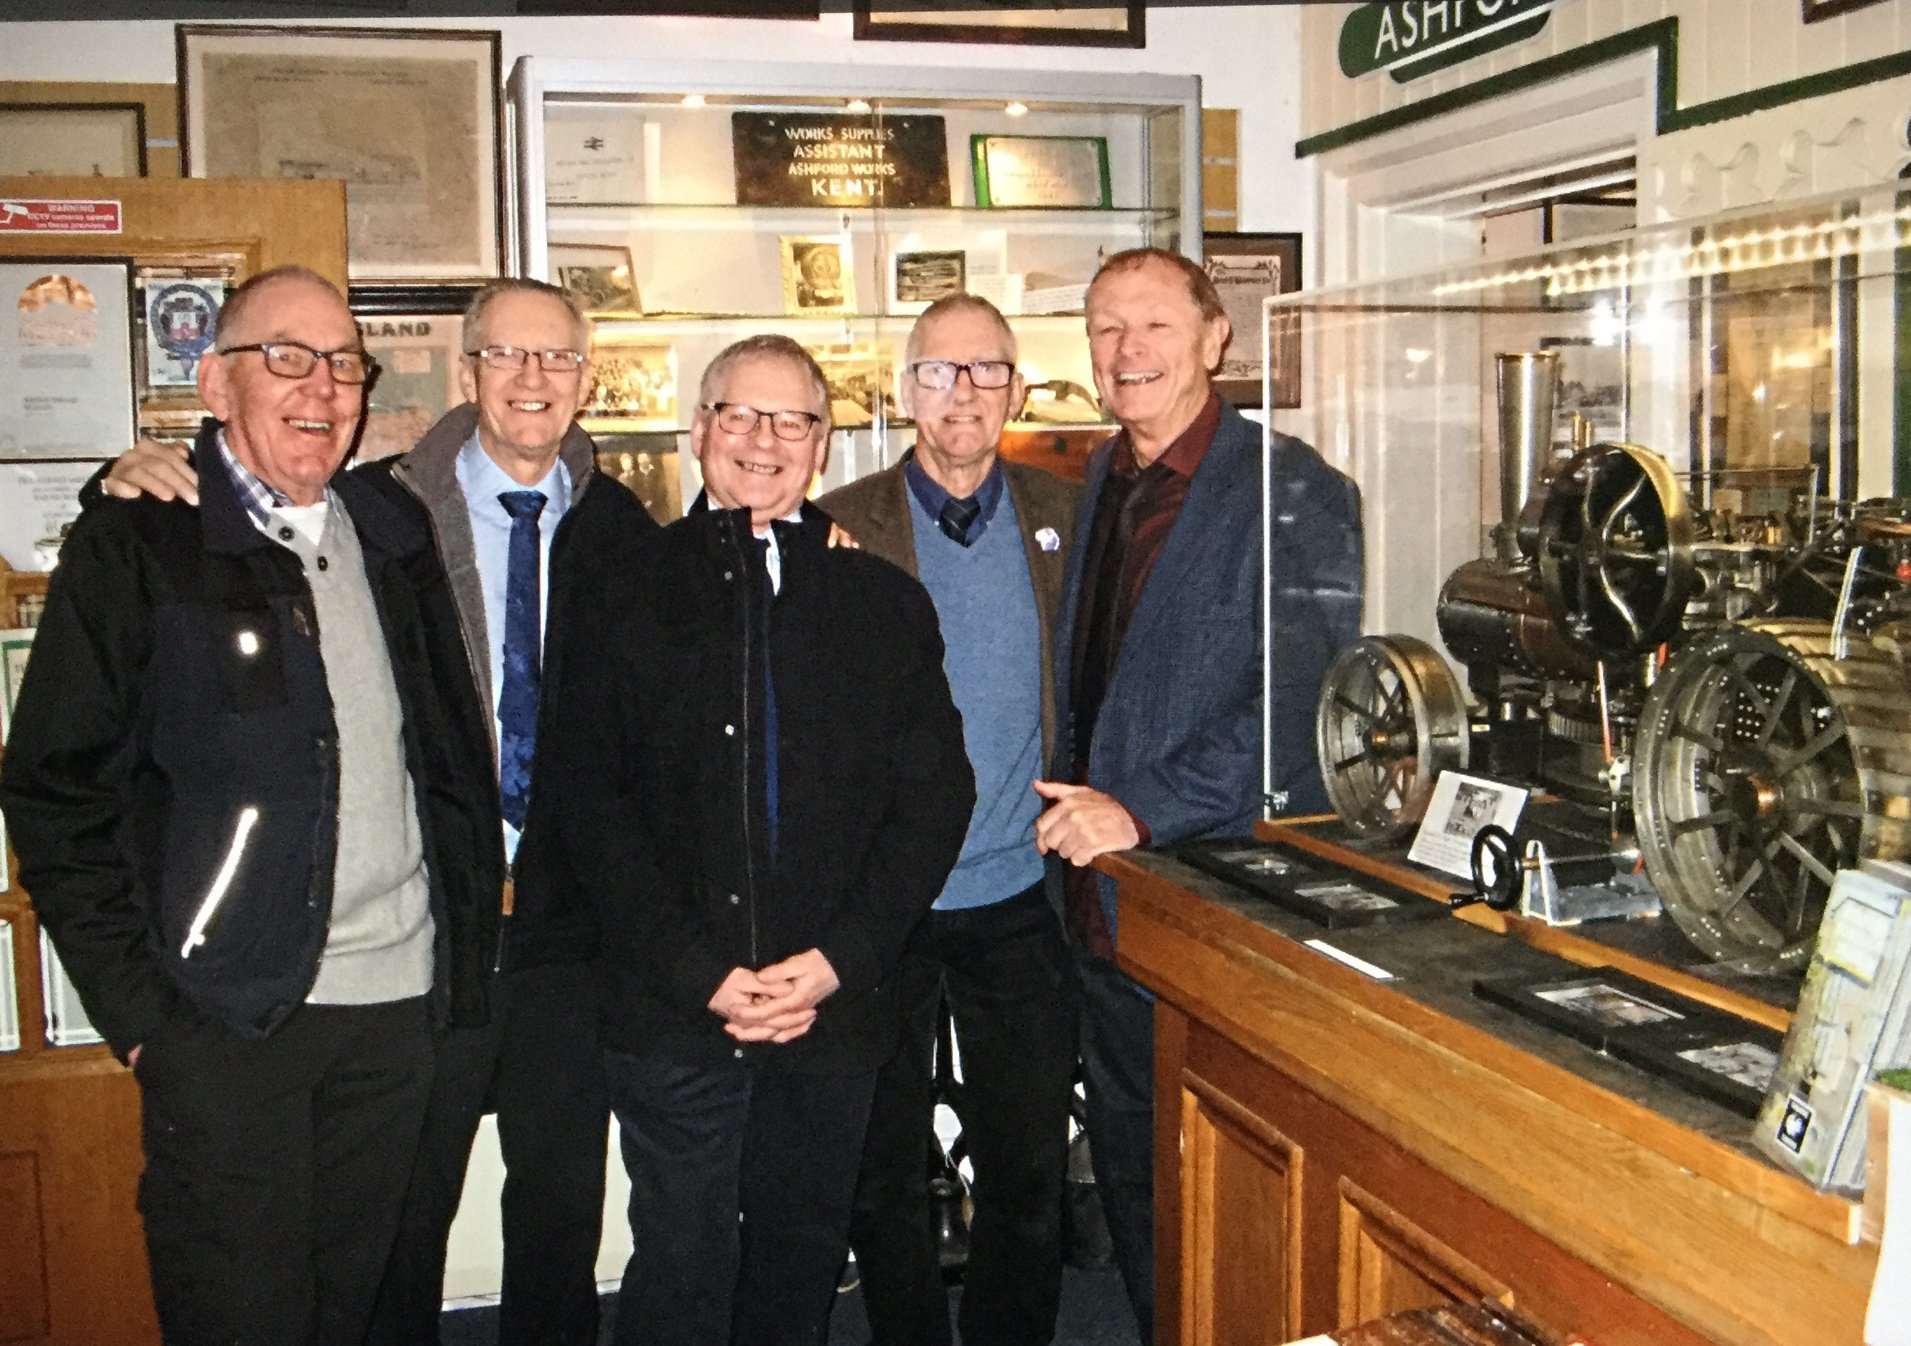 NOW - Steve Goldup, Colin Rich, Anthony Jenkins, Terry Watson and David Jenkins were the first apprentices to do their apprenticeships at the old Ashford railway works in the 1970s (1291503)